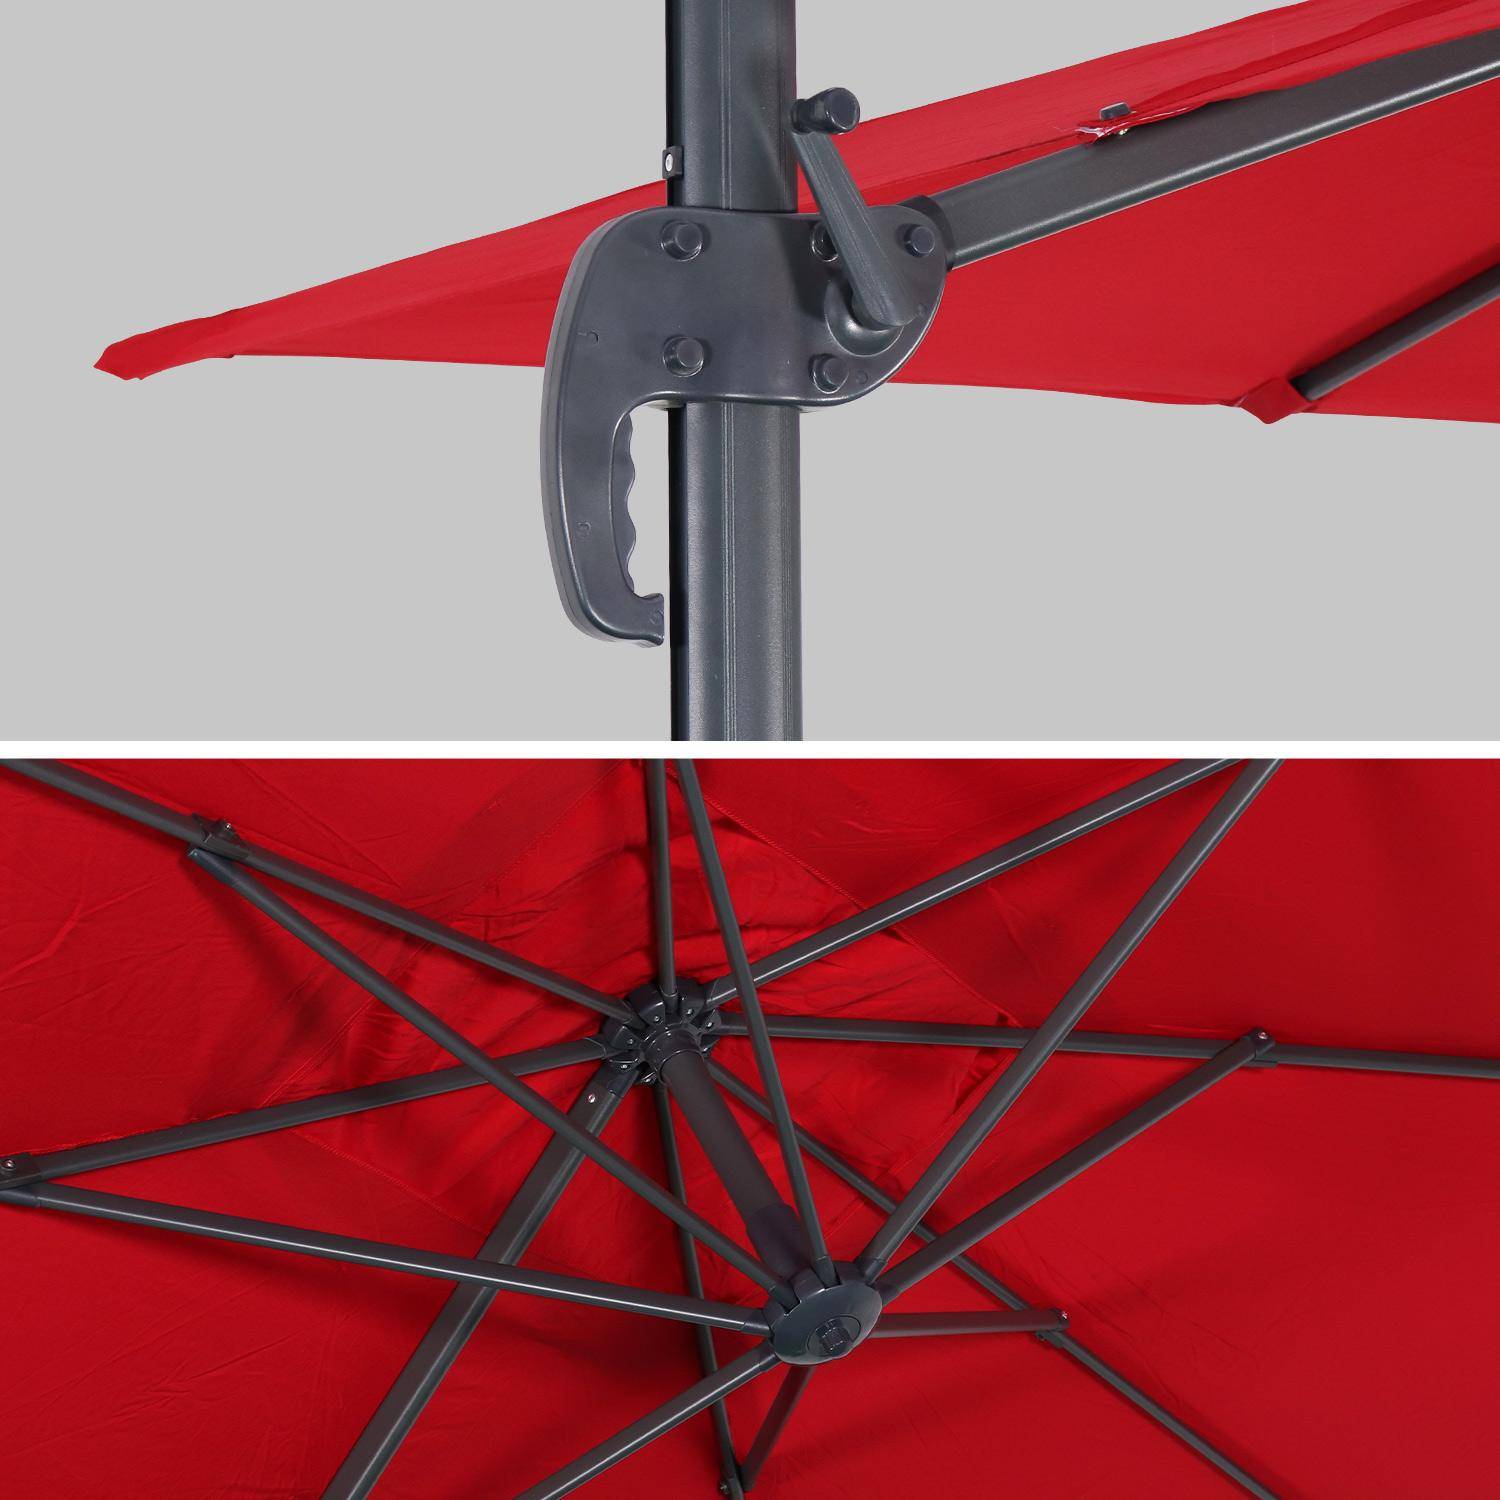 2x3m rectangular cantilever paraso - parasol can be tilted, folded and rotated 360 degreesl - Antibes - Red Photo4